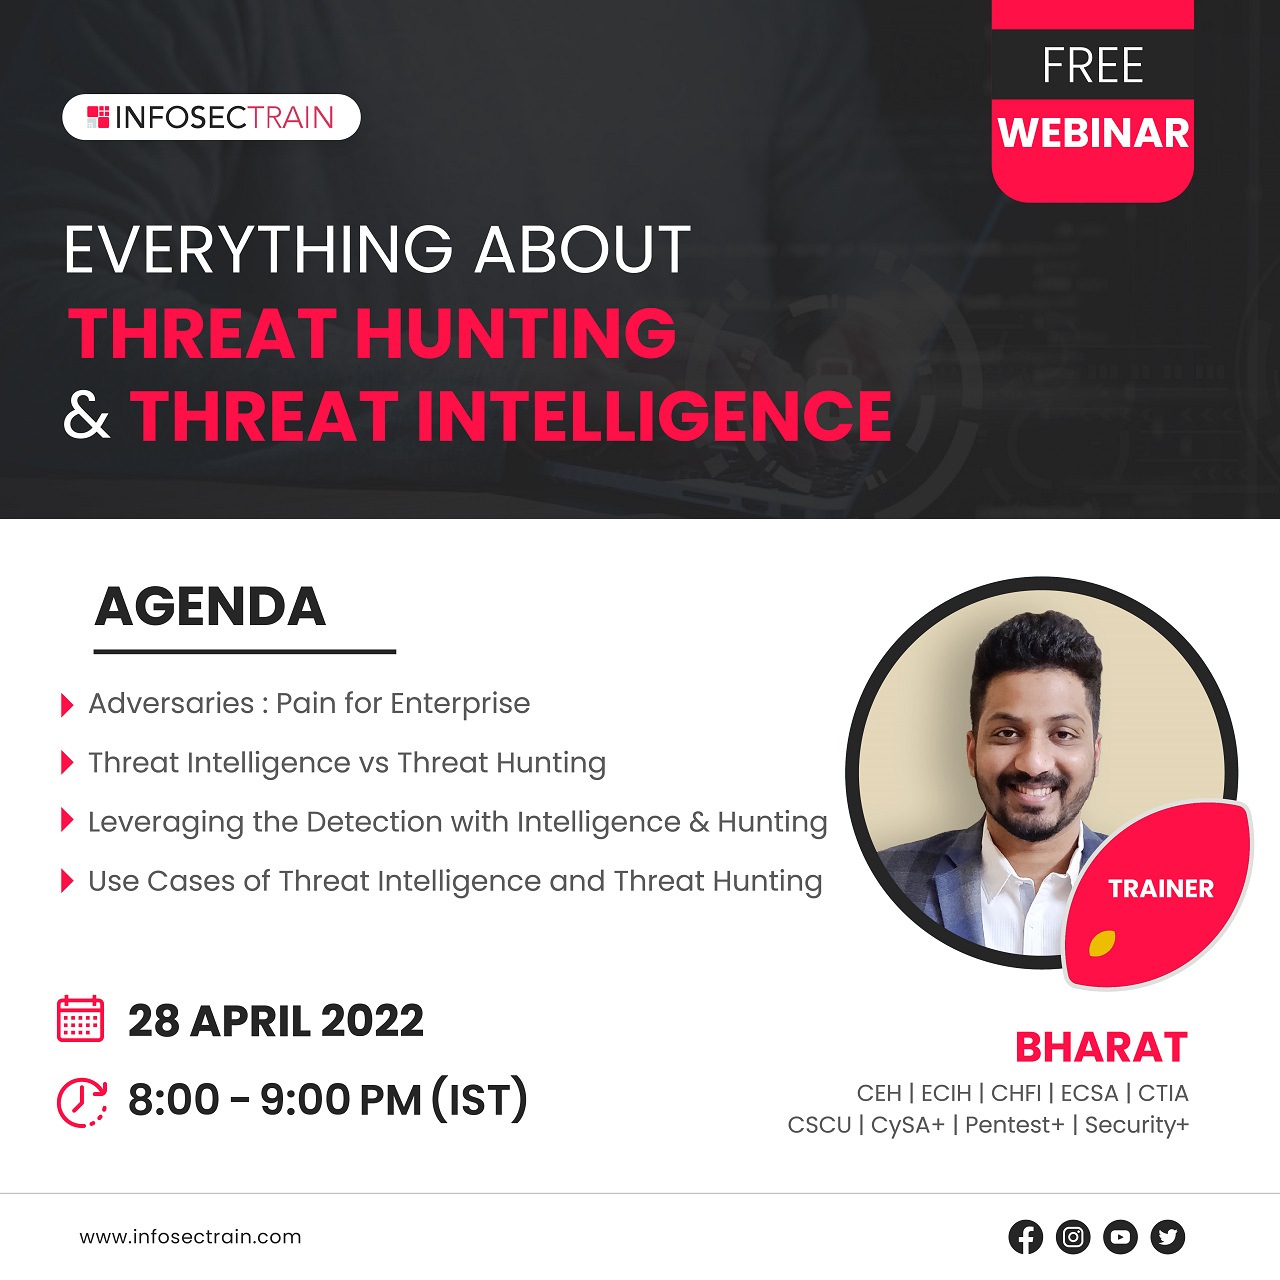 Free webinar on Everything about Threat Hunting & Threat Intelligence, Online Event